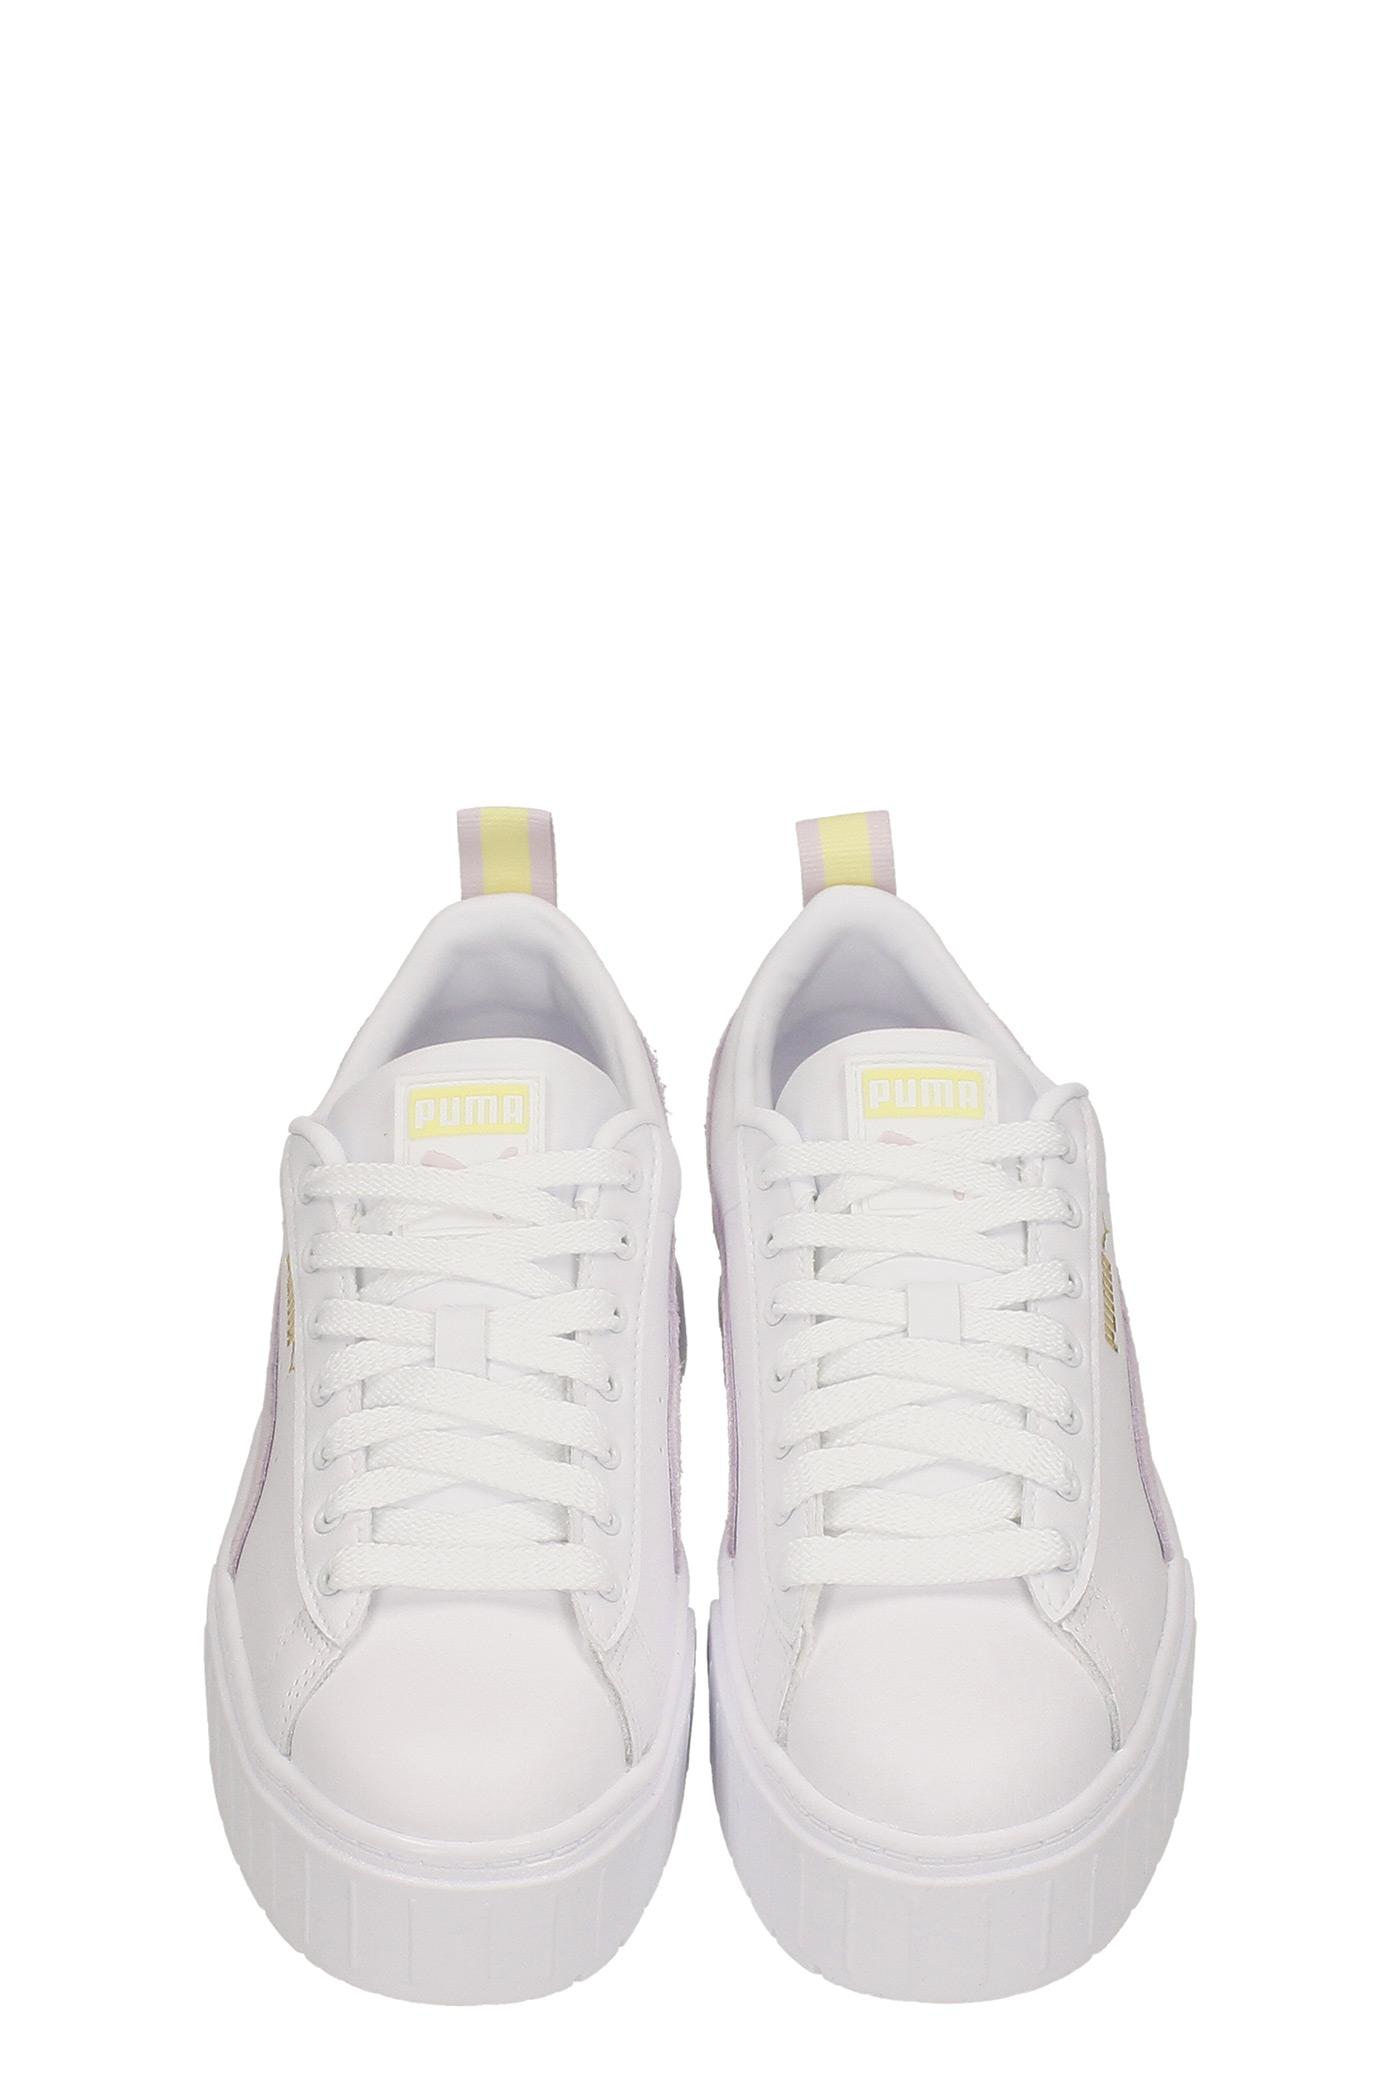 PUMA Mayze Sneakers In White Leather | Lyst